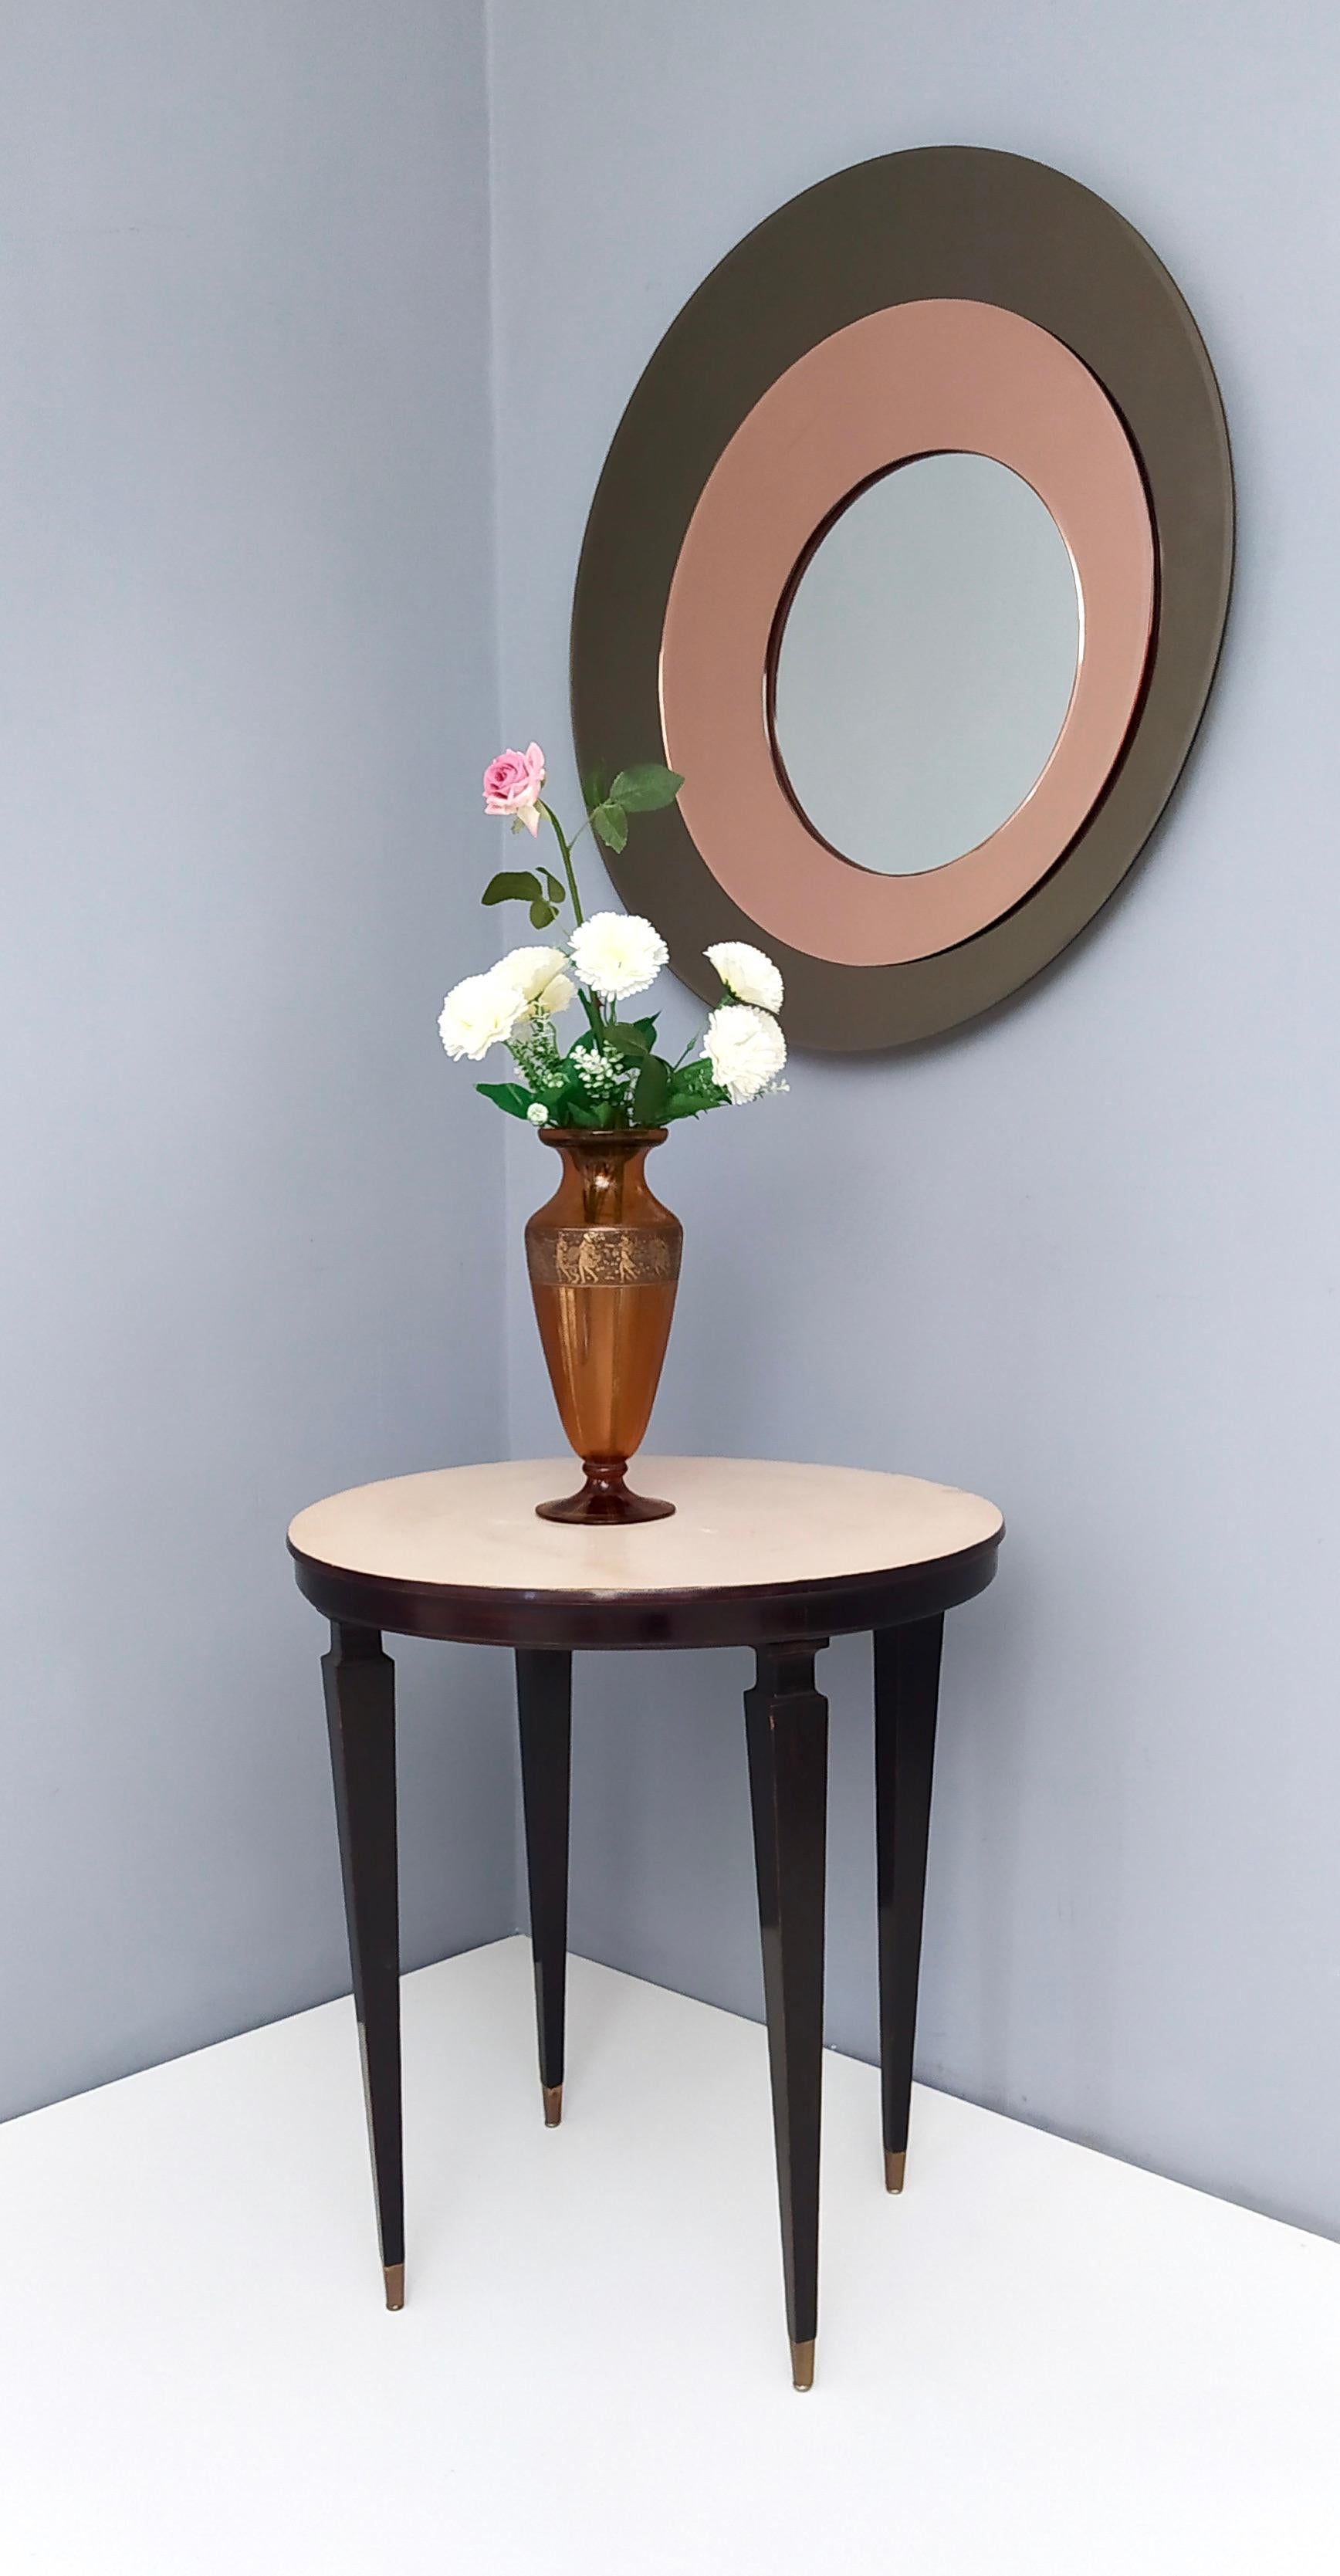 Post-Modern VIntage Round Wall Mirror by Rimadesio with a Bronze and Old Rose Mirrored Frame